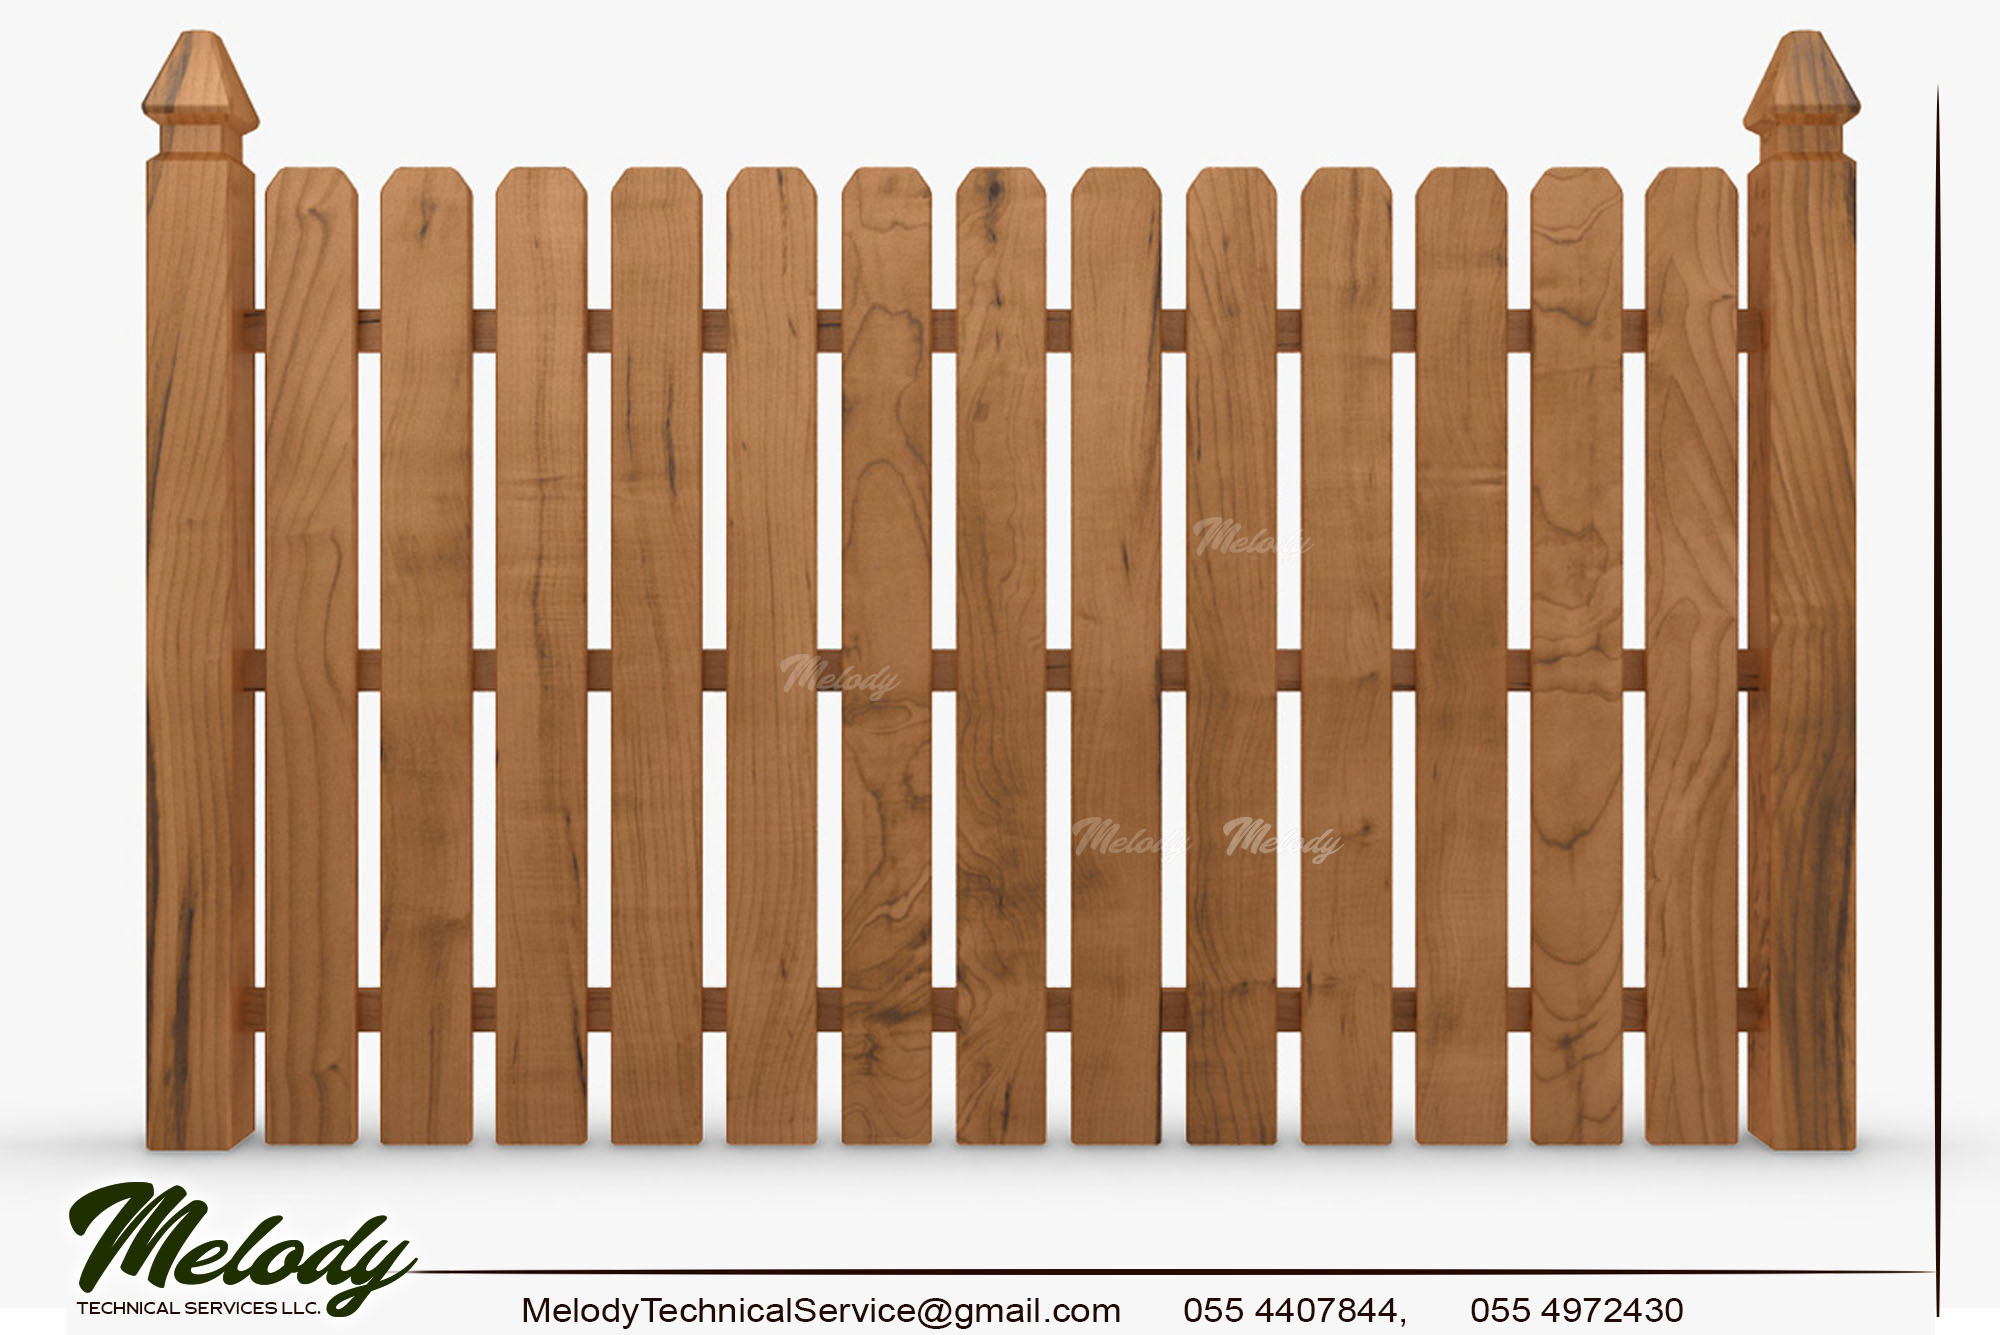 Get the Perfect Wooden Fence For Your Garden